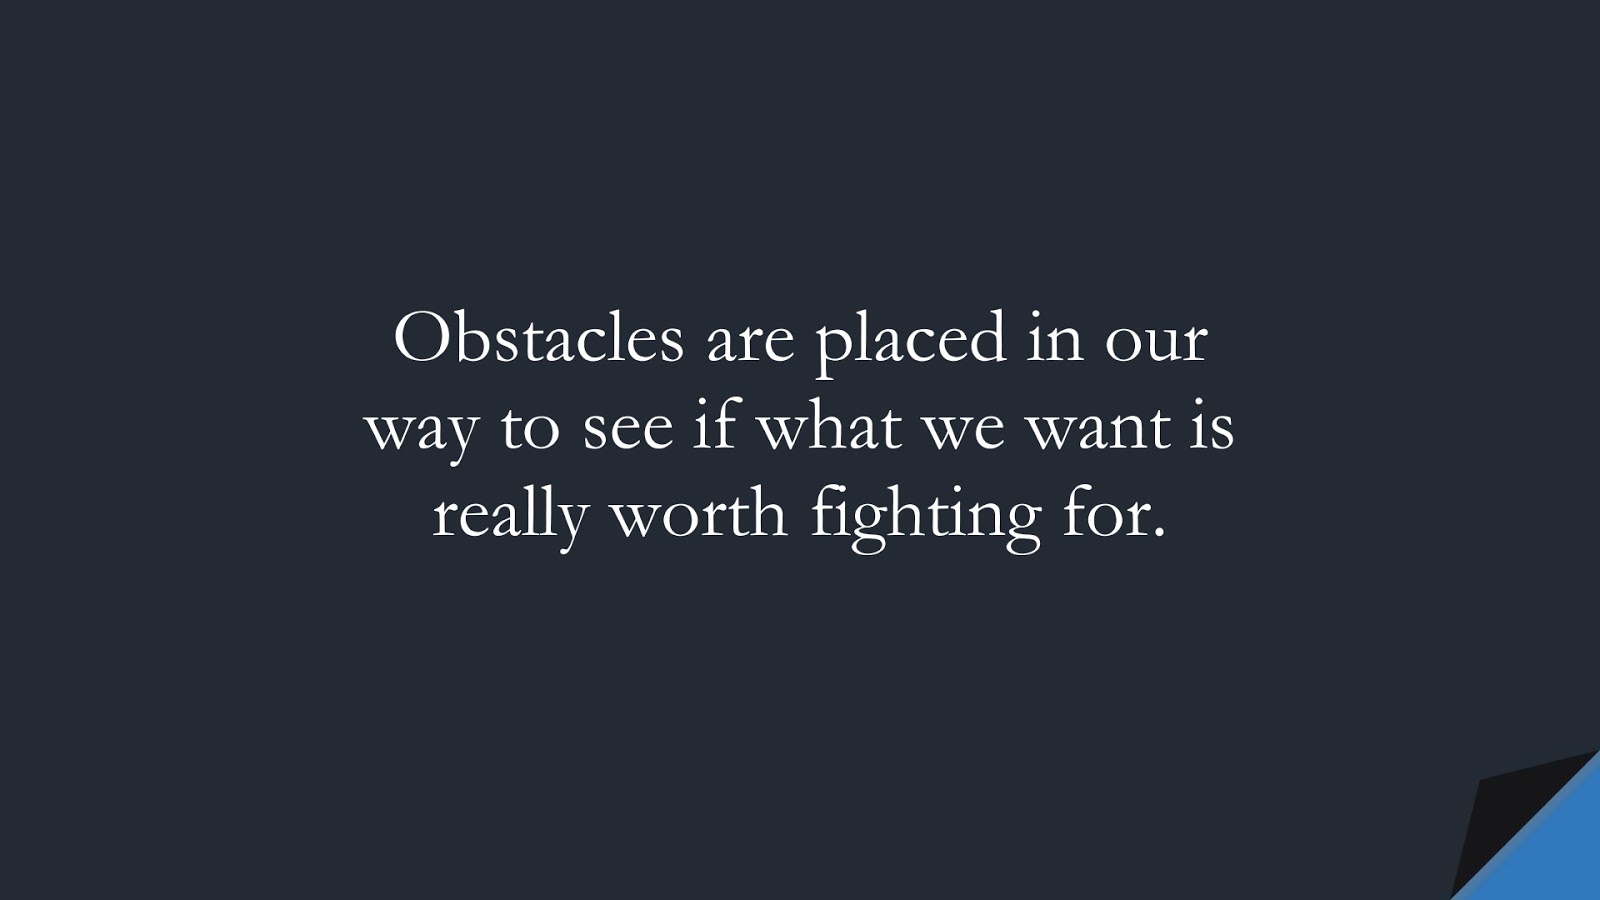 Obstacles are placed in our way to see if what we want is really worth fighting for.FALSE